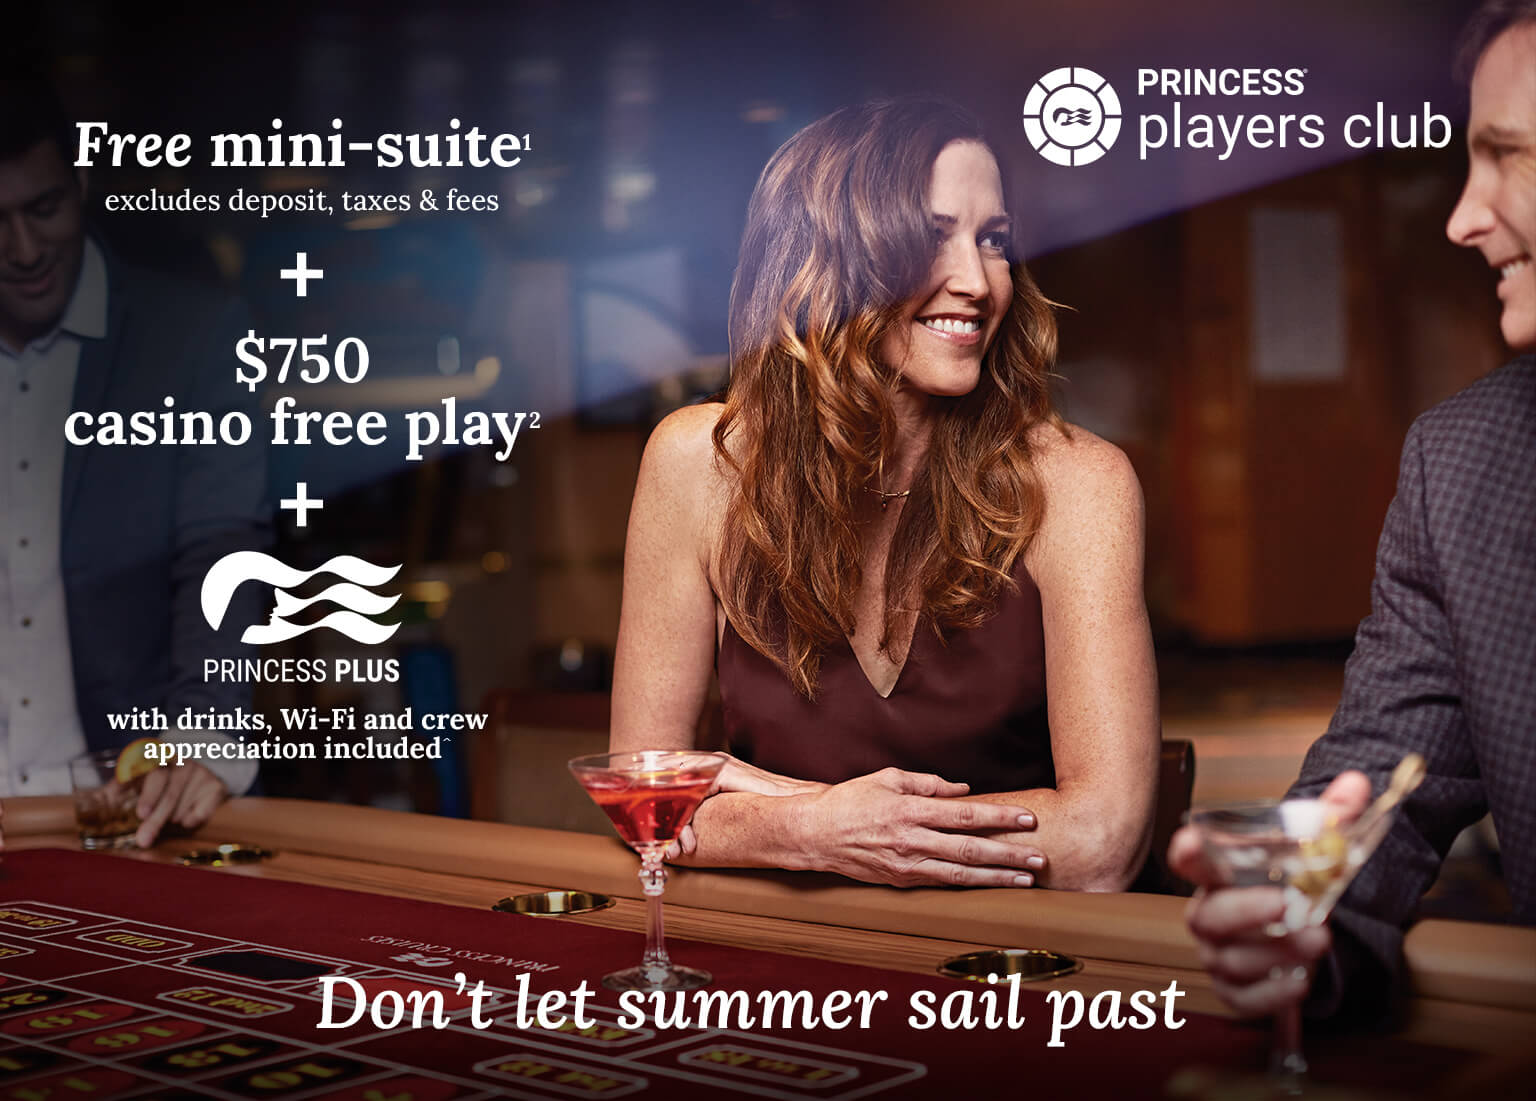 Free mini-suite + $750 casino free play + Princess Plus included. Click here to book.